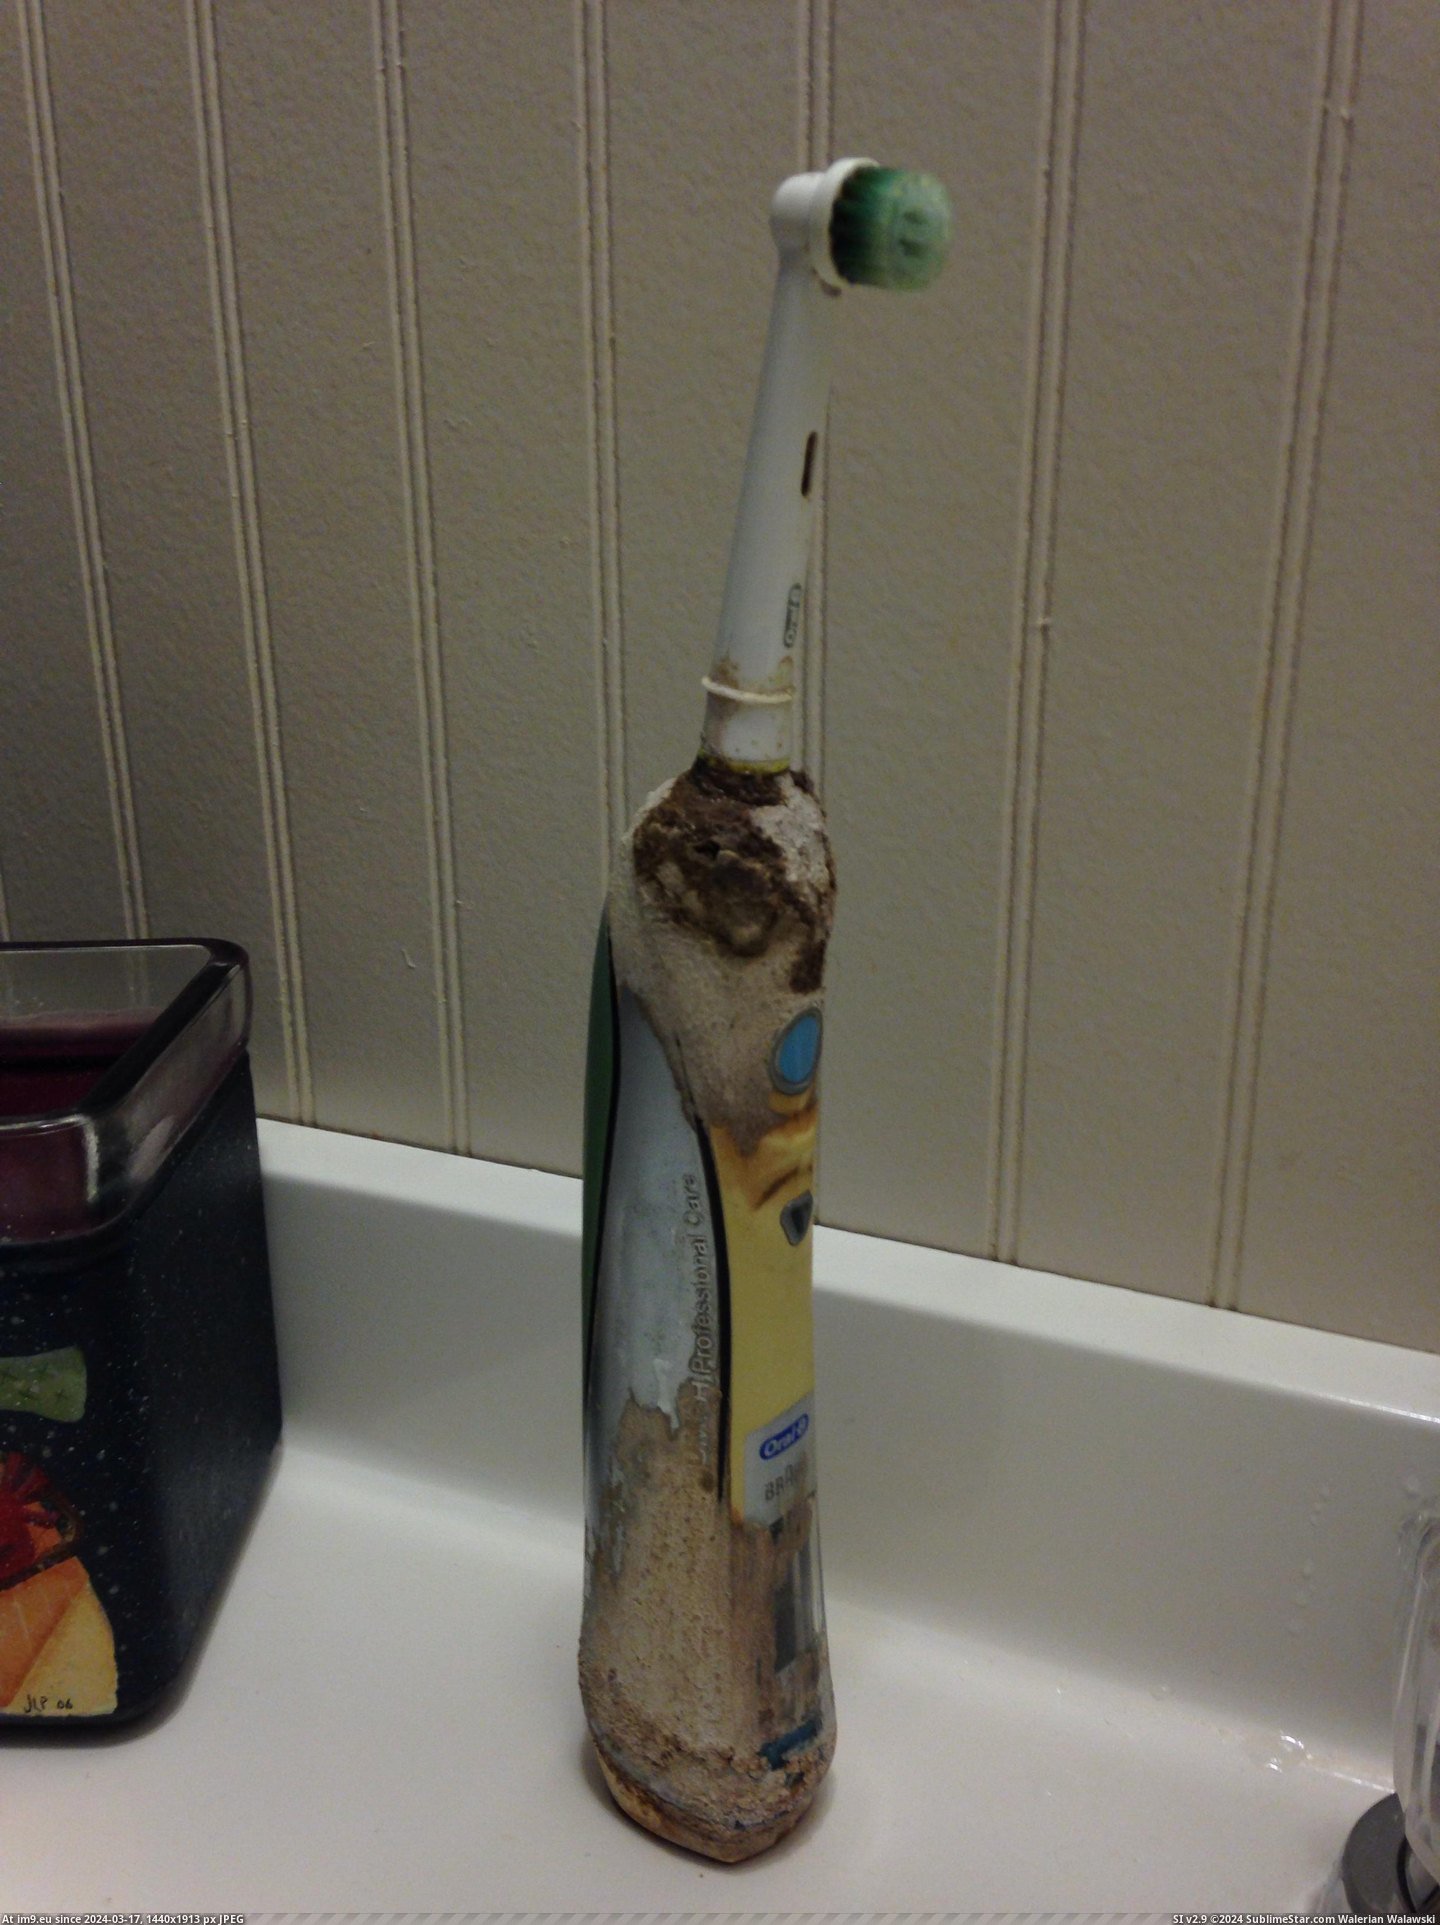 #Wtf #Toothbrush #Sister [Wtf] This is my sister's toothbrush. Pic. (Изображение из альбом My r/WTF favs))